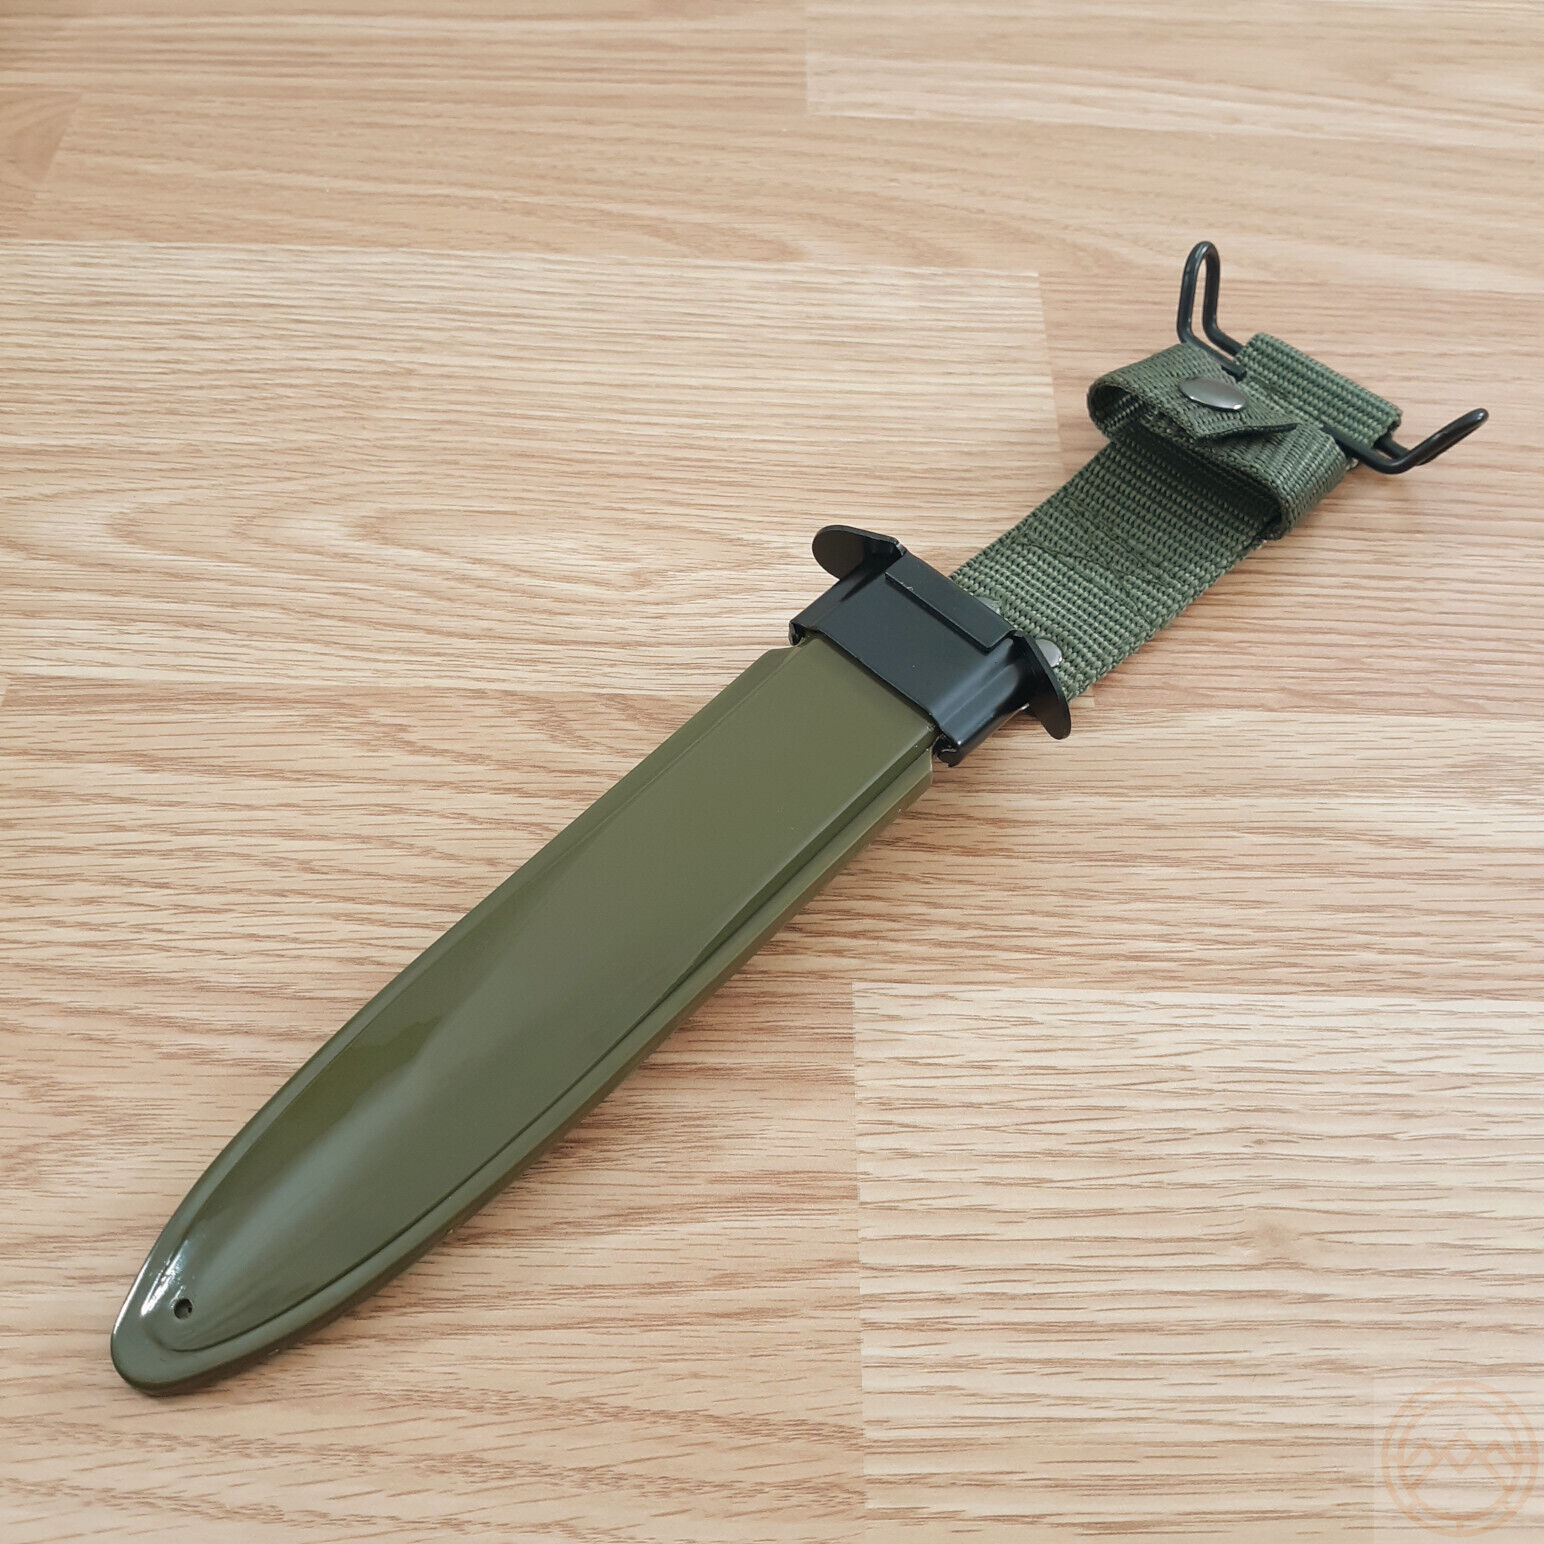 M-7 Combat Knife Sheath Heavy Black Composition Construction With Olive Green